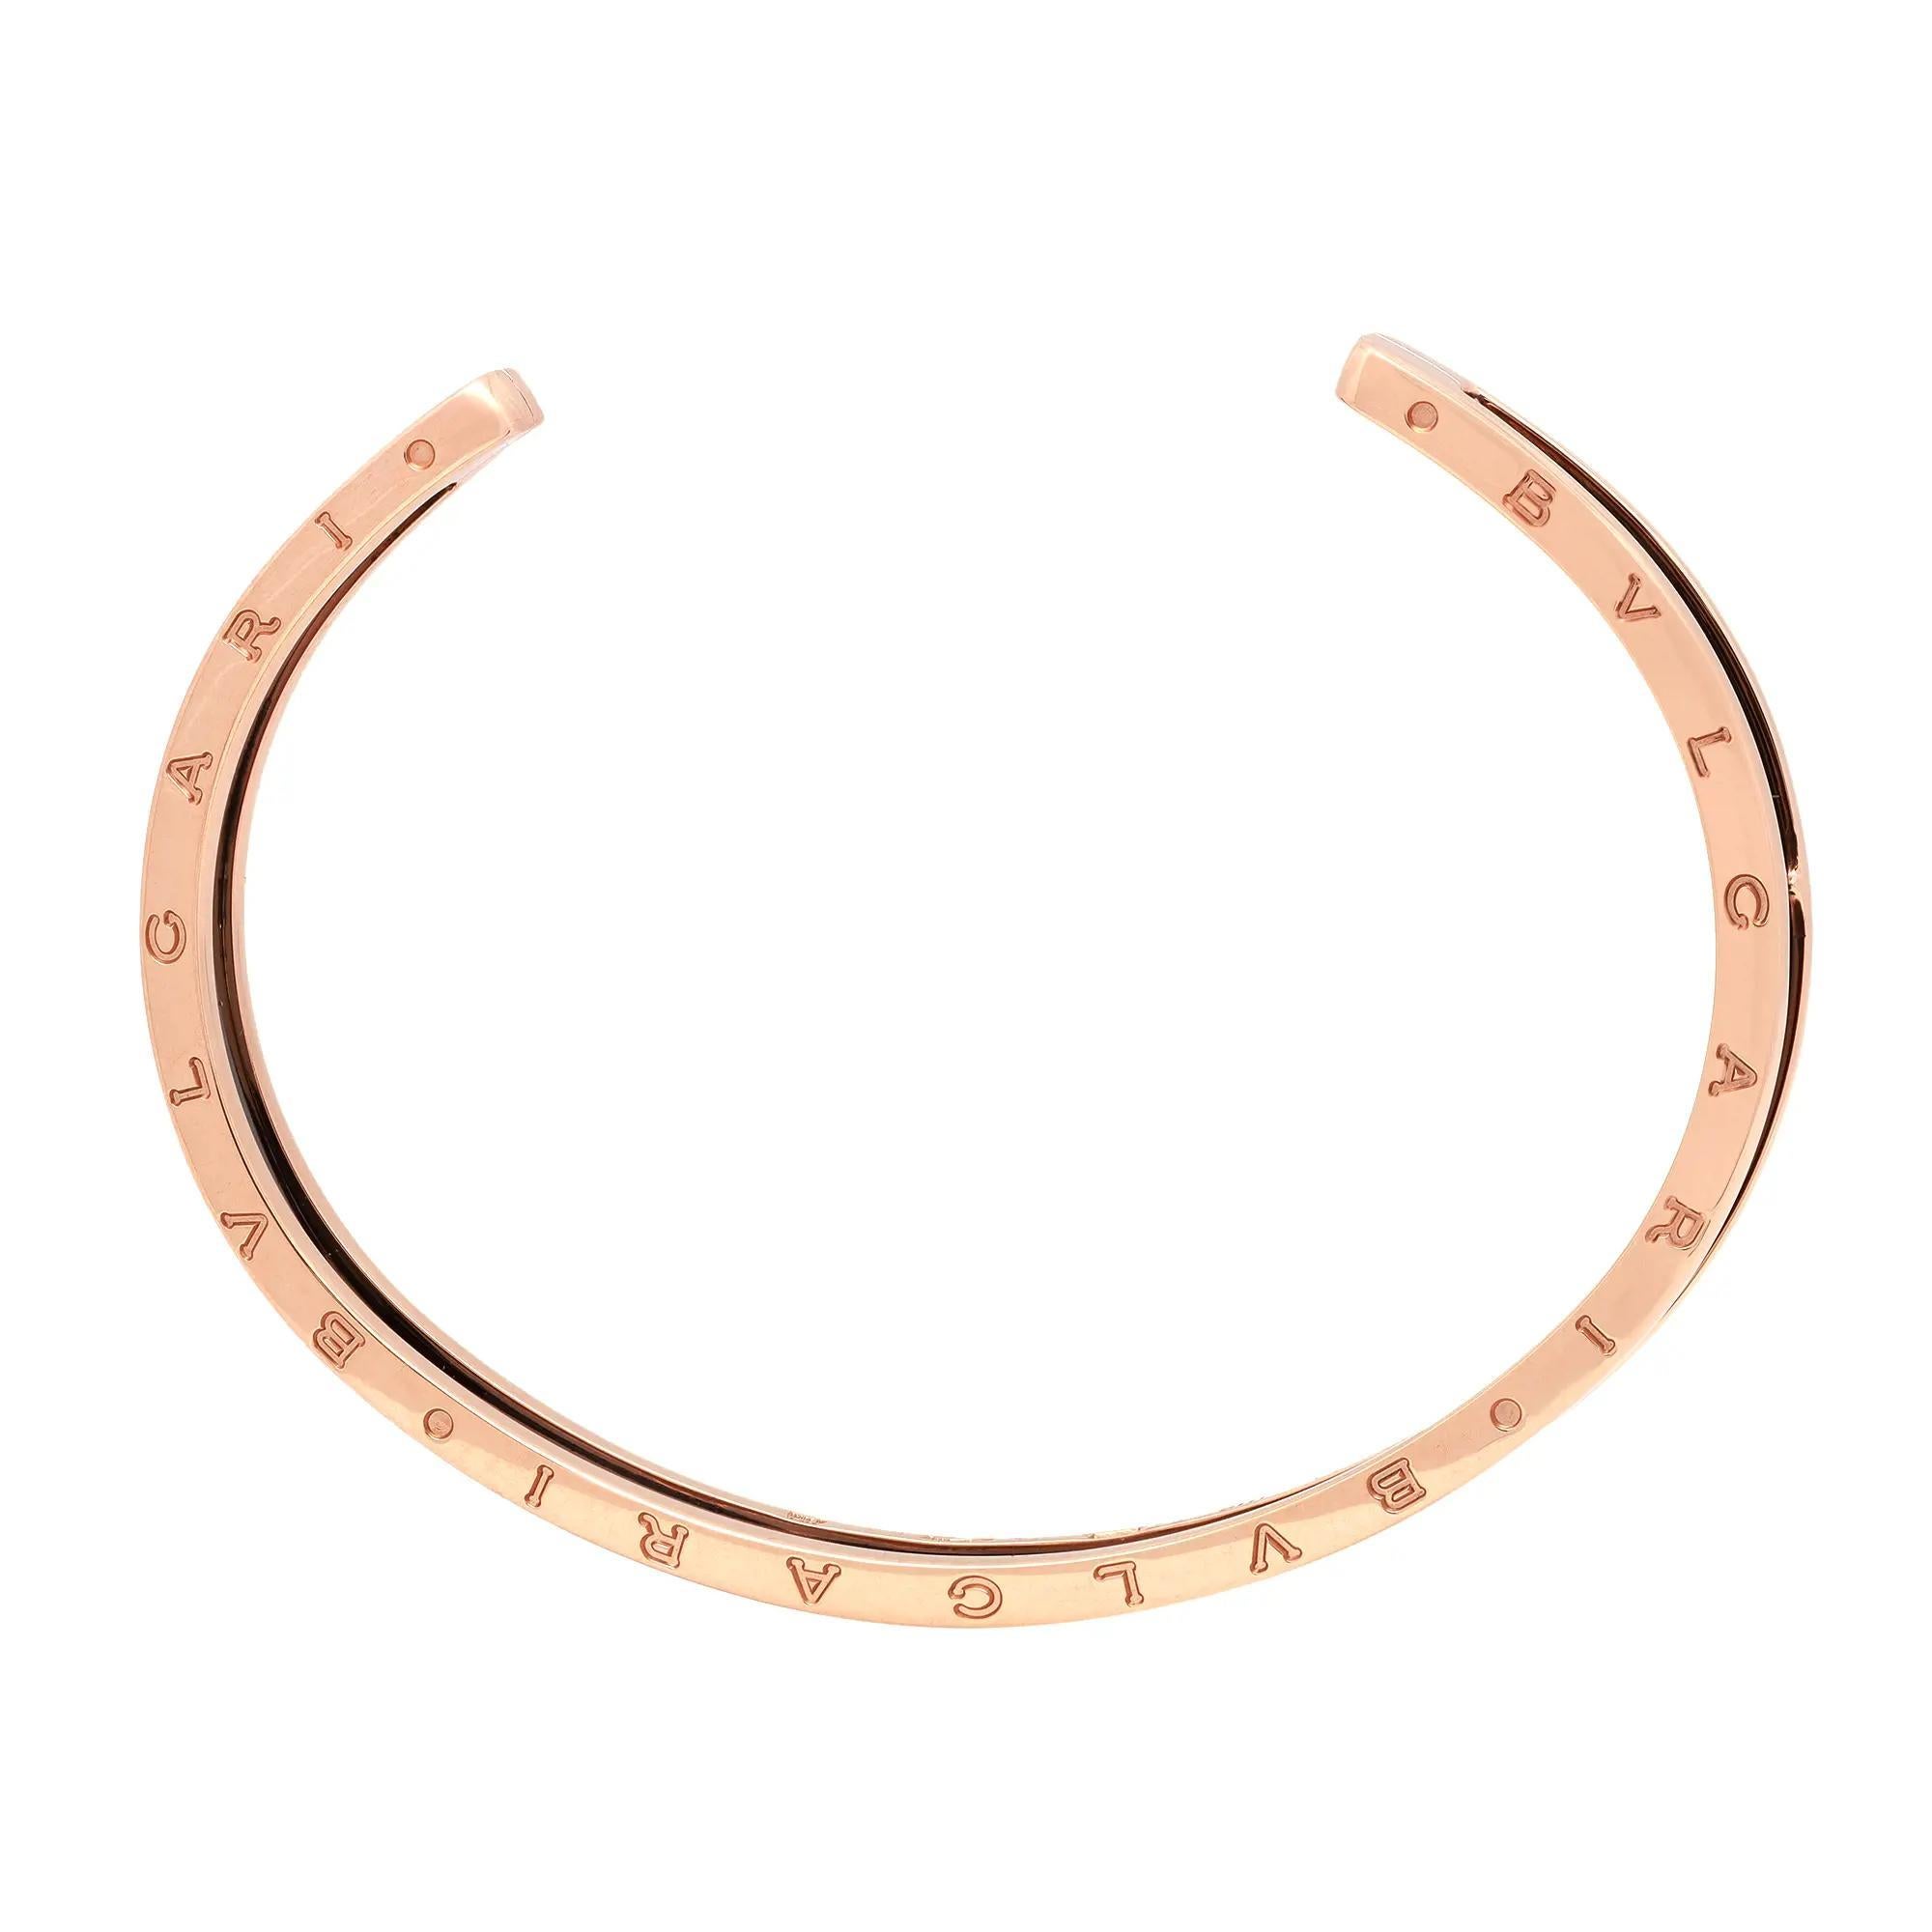 This stunning B.Zero1 open cuff bracelet comes from the house of Bvlgari. Well crafted in 18K rose gold and ceramic. This bracelet features black ceramic in the center with rose gold frame. Bvlgari logo engraving on the edges. Size: Small to Medium.